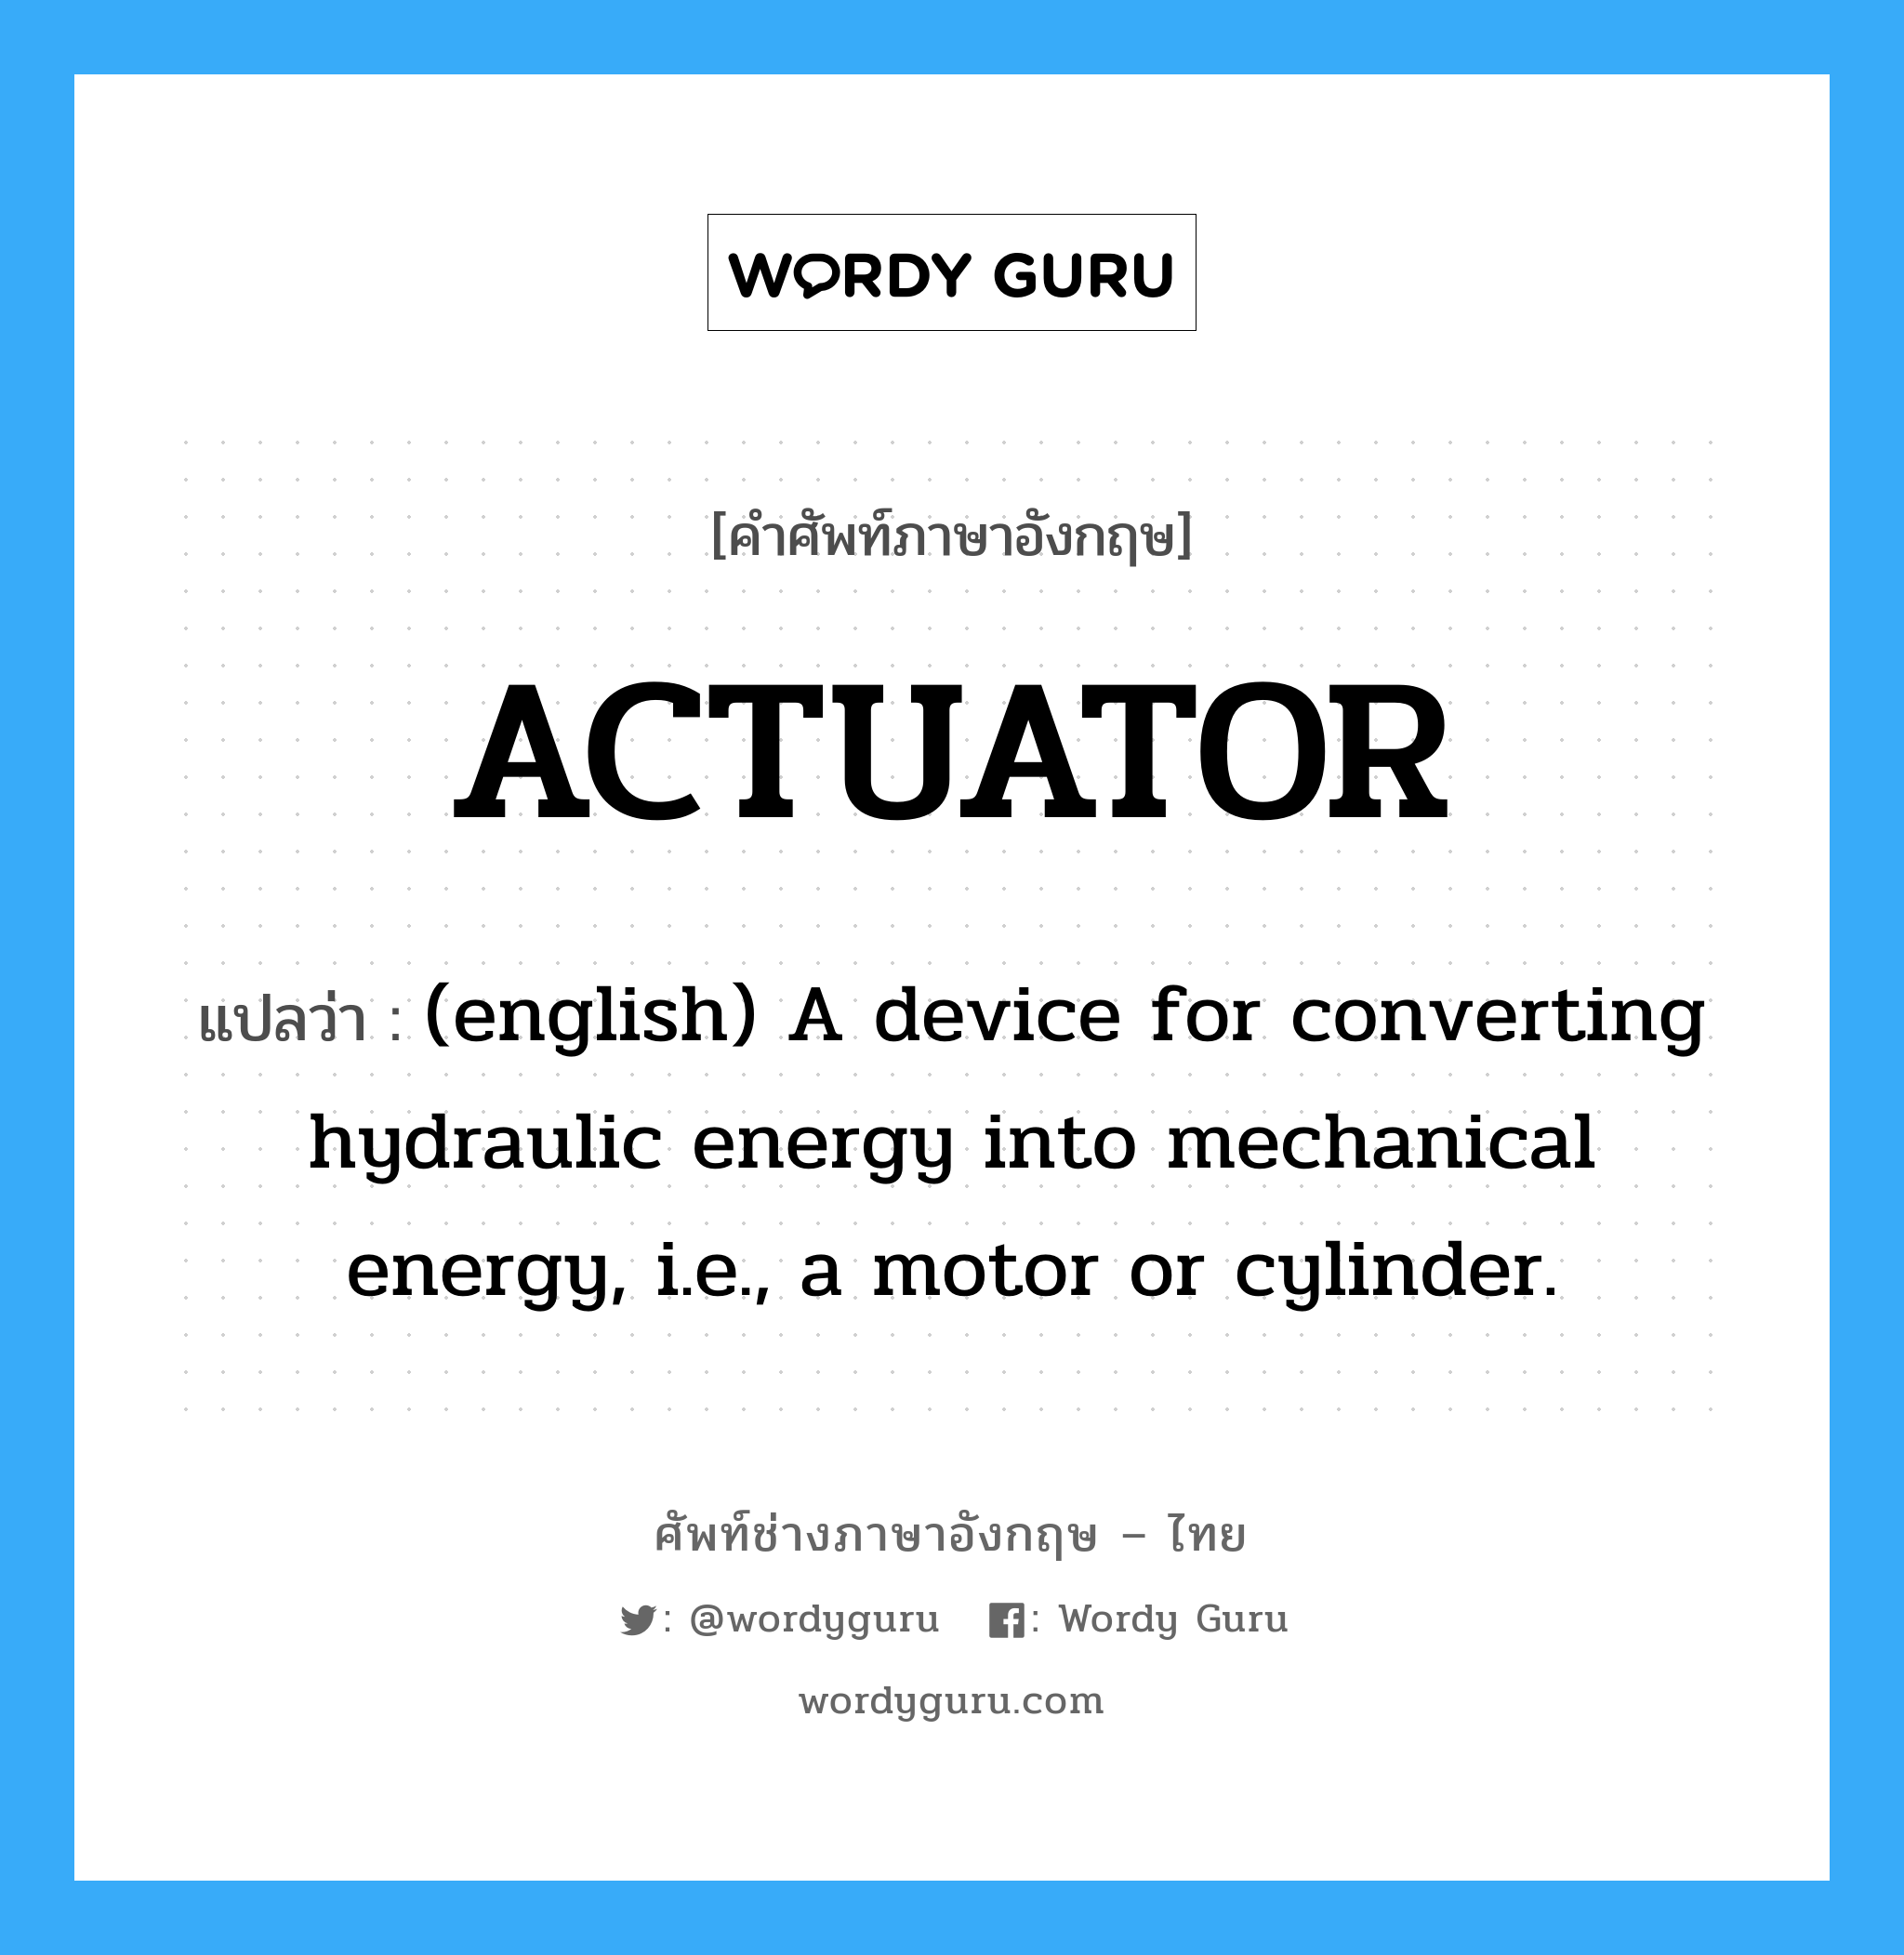 ACTUATOR แปลว่า?, คำศัพท์ช่างภาษาอังกฤษ - ไทย ACTUATOR คำศัพท์ภาษาอังกฤษ ACTUATOR แปลว่า (english) A device for converting hydraulic energy into mechanical energy, i.e., a motor or cylinder.